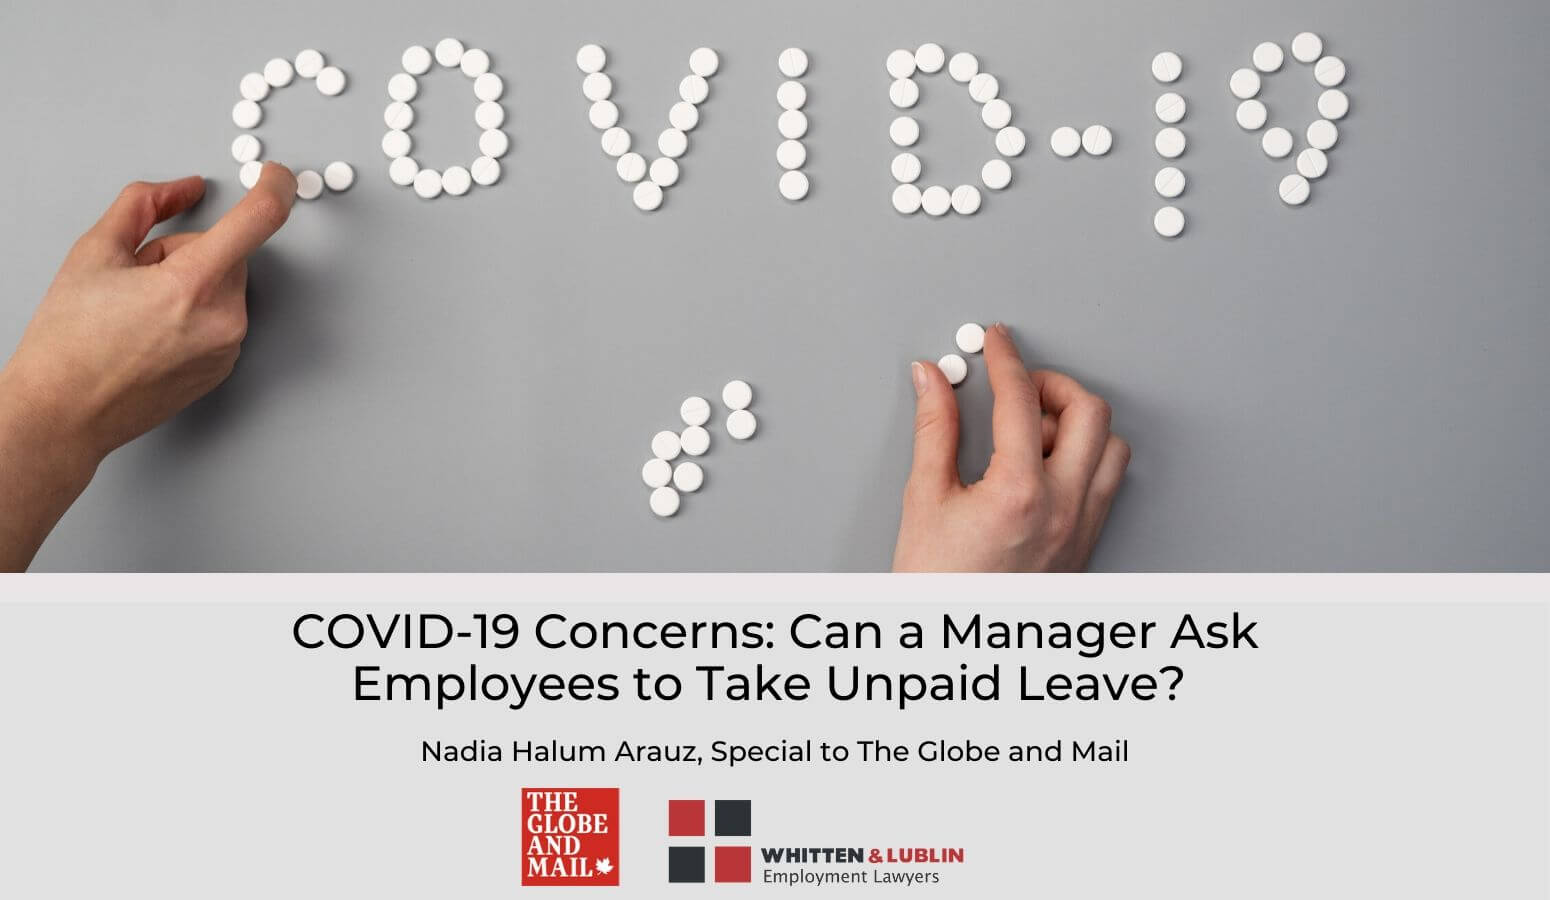 Featured image for “Can a Manager Ask Employees to Take Unpaid Leave? Is it Legal? COVID-19 Concerns”